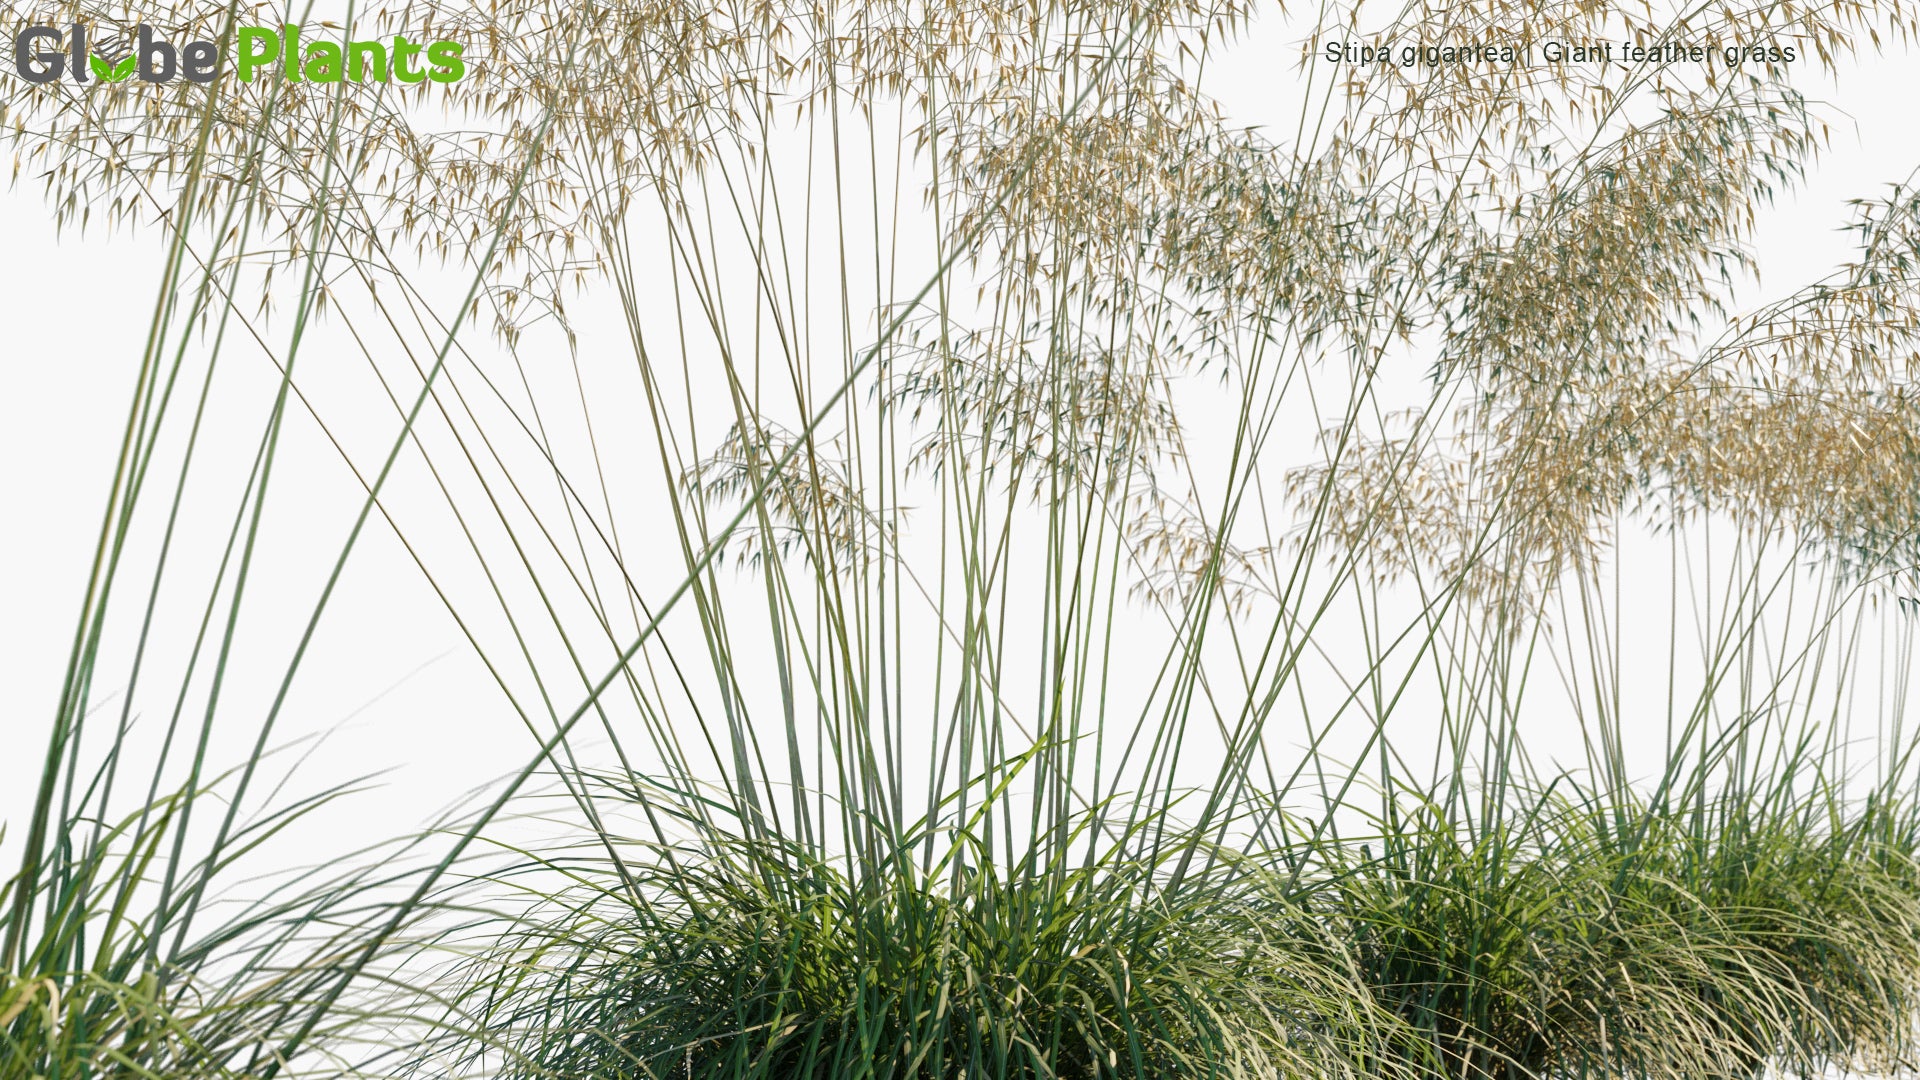 Low Poly Stipa Gigantea - Giant Feather Grass, Giant Needle Grass, Golden Oats (3D Model)